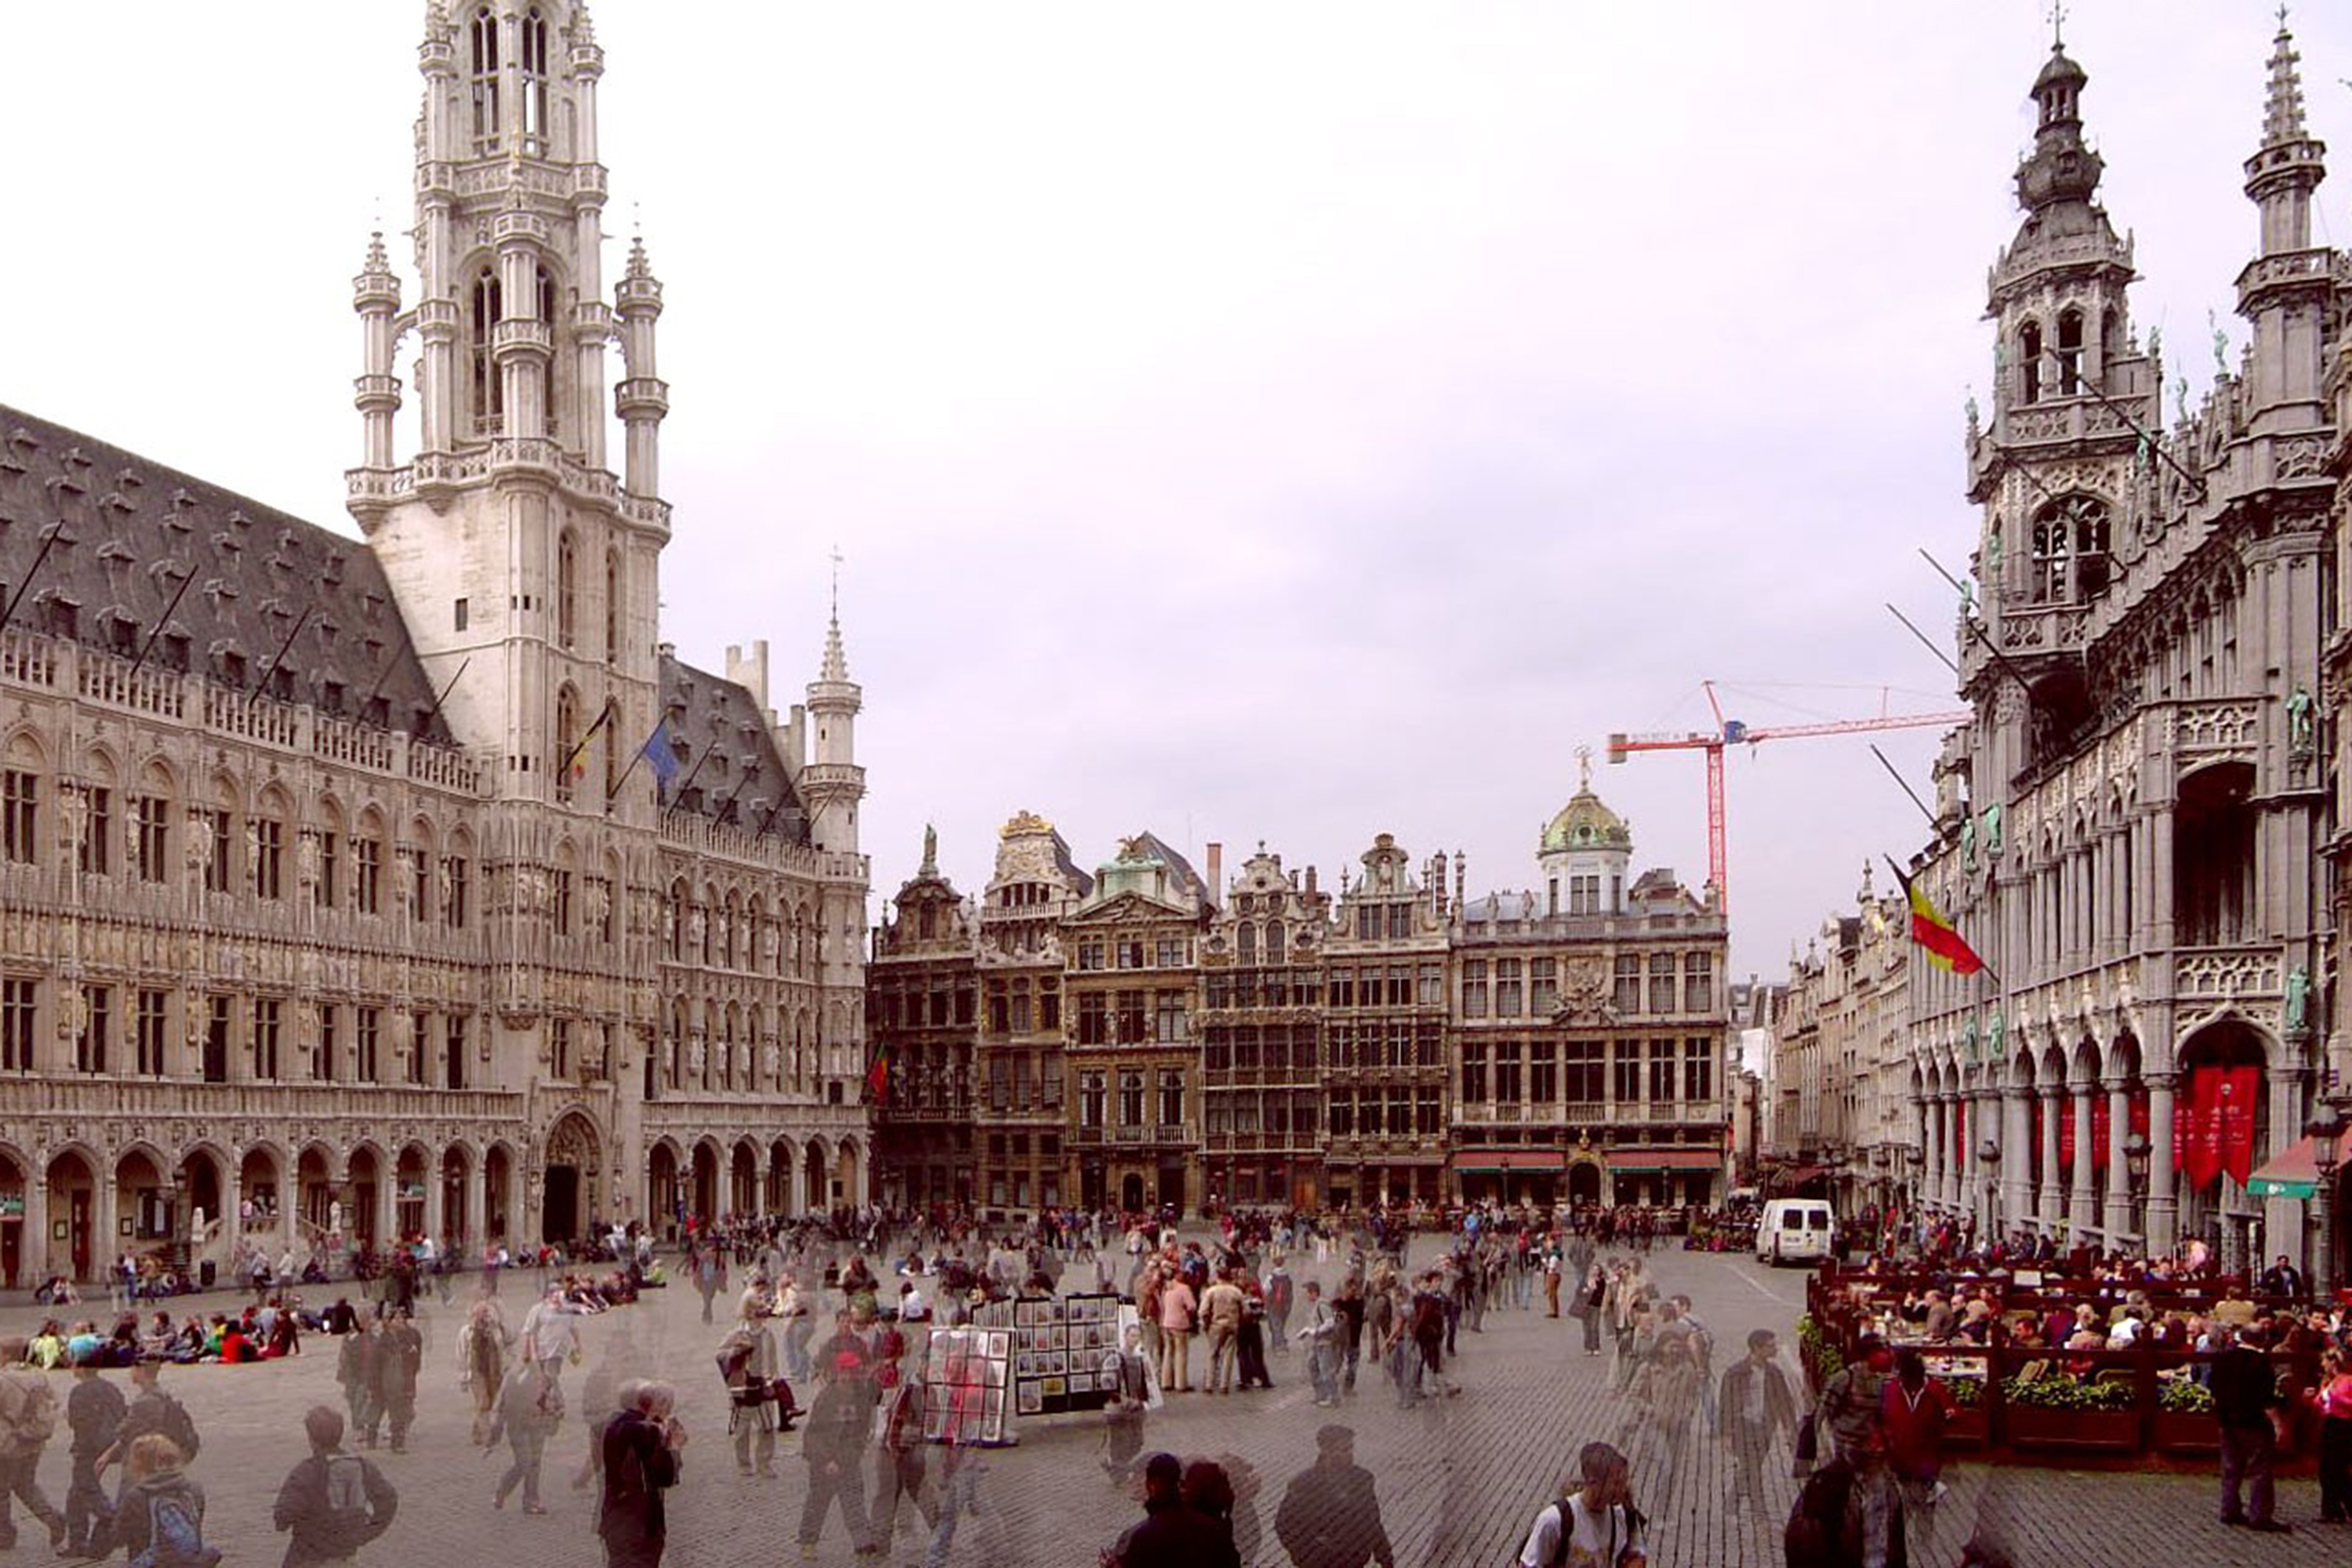 Brussels city centre